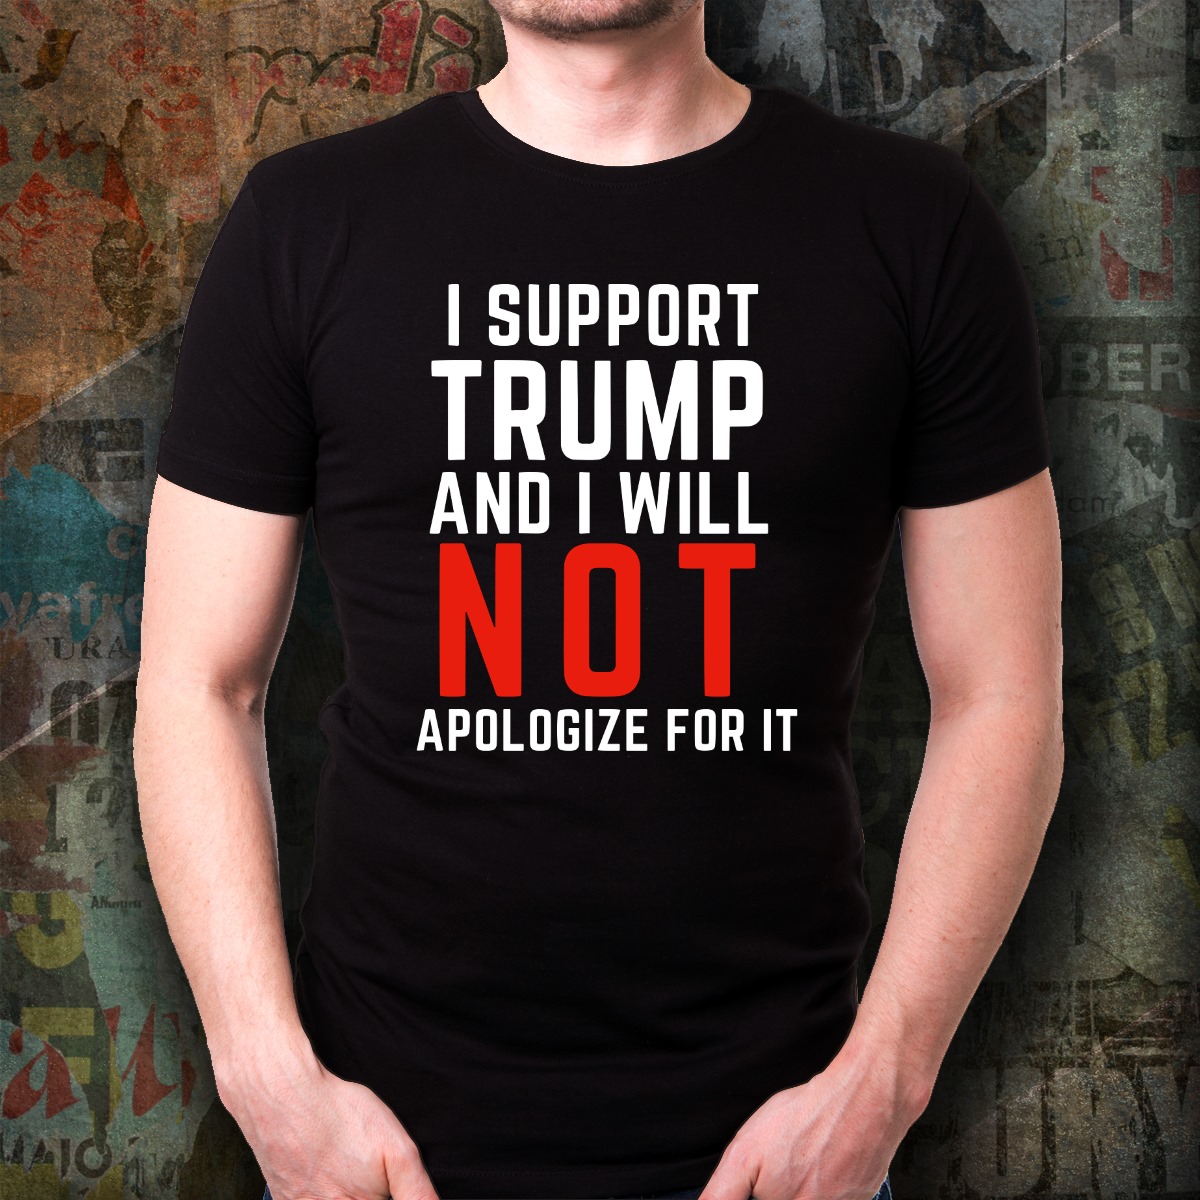 I support TRUMP and i will not apologize for it.